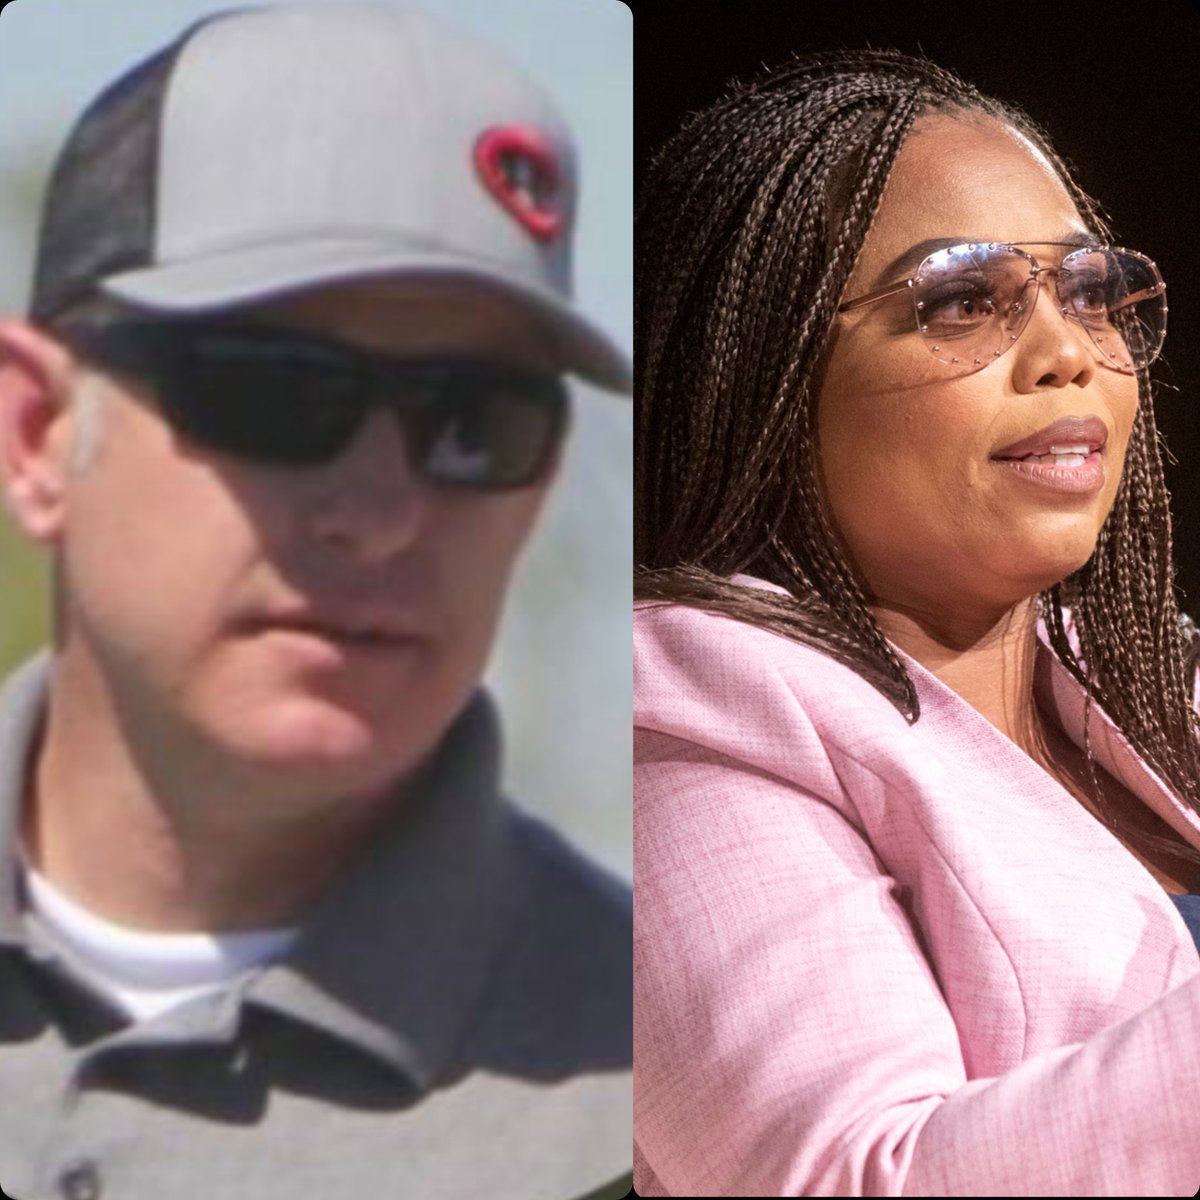 Jemele Hill quoted Gunther Eagleman saying, 'Claudine Gay was the only Black Harvard President in history, she had to be extremely qualified. But don’t let me interfere with your racism.' This made Gunther Eagleman reply, 'How cute… Race Baiter Jemele Hill poppin in to tell us…